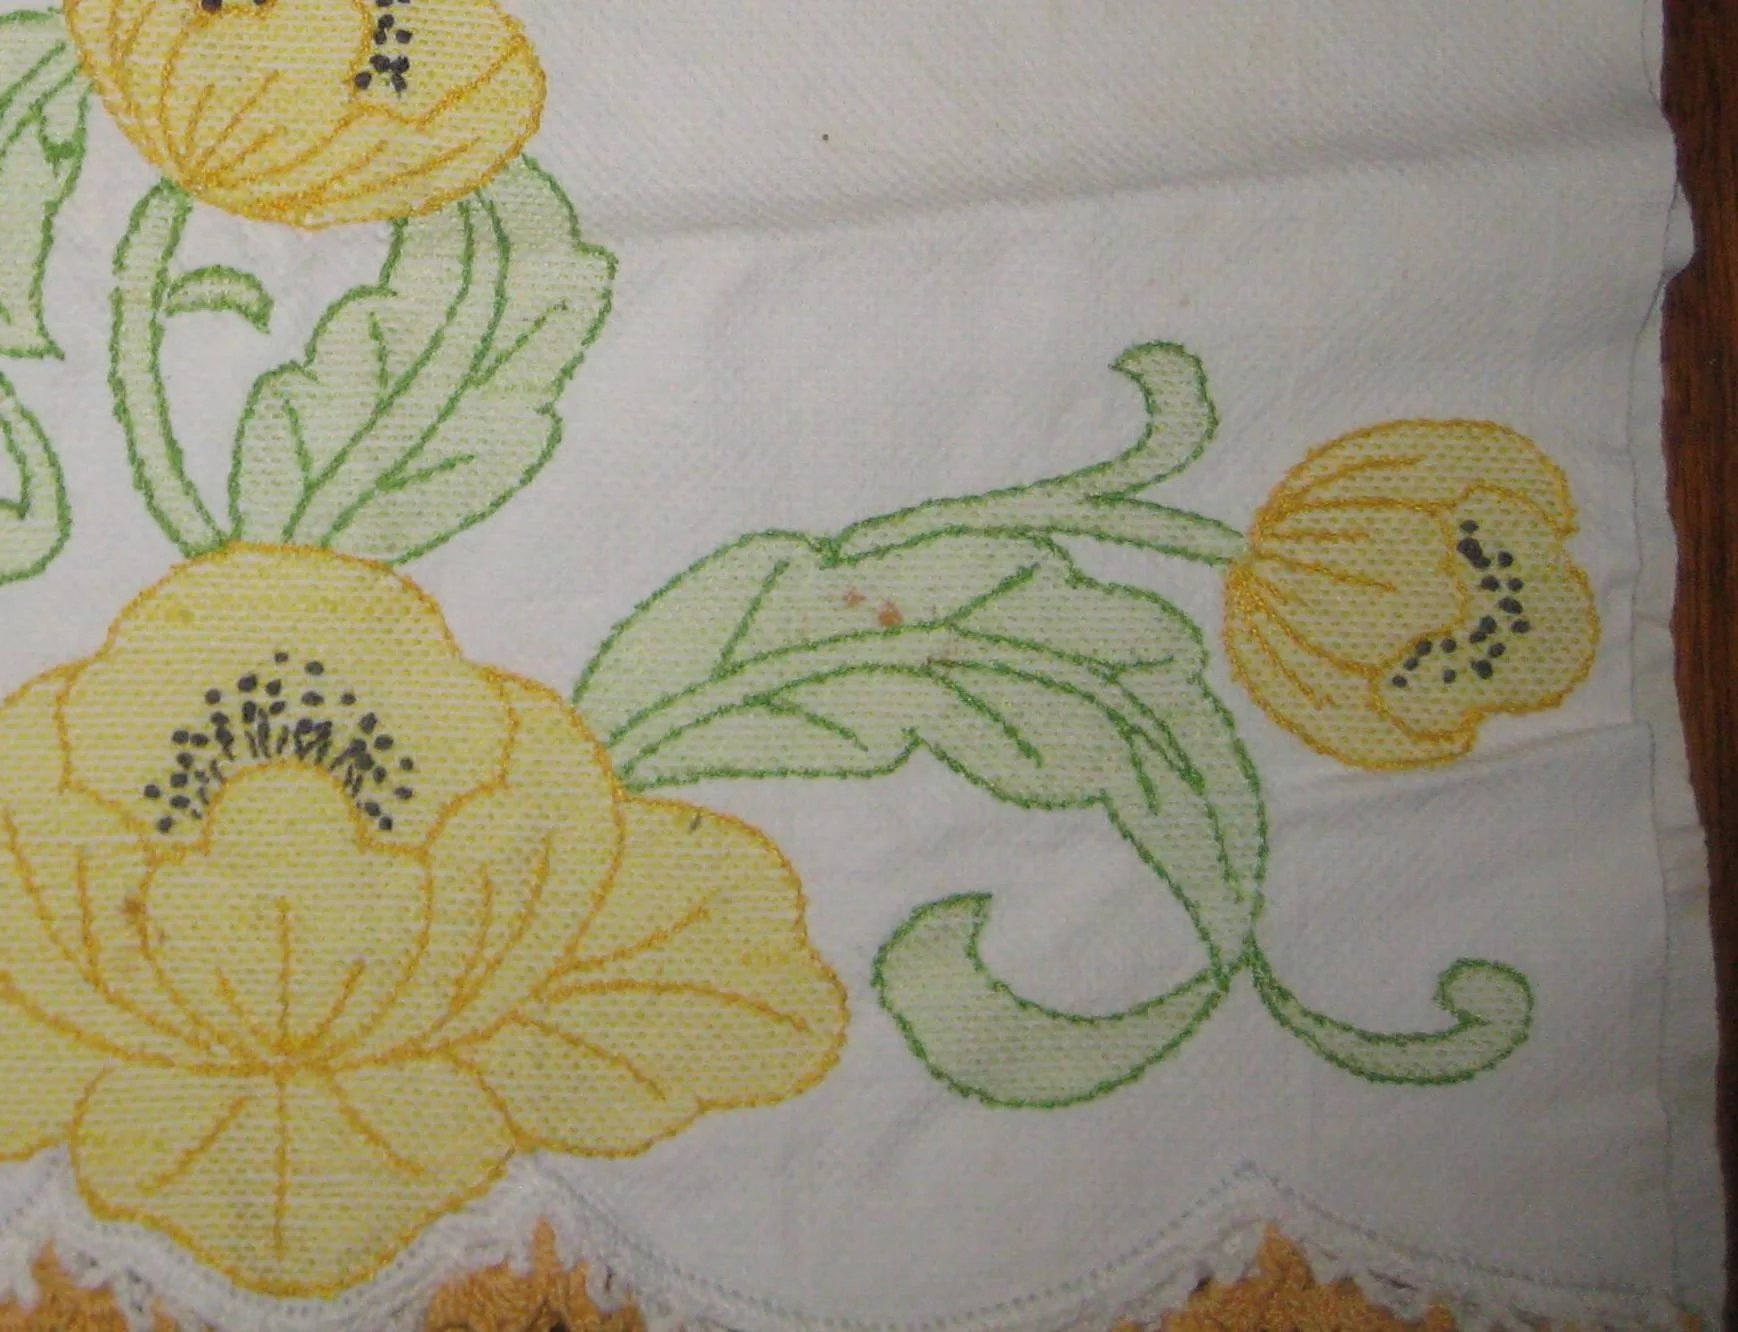 Huck Embroidery Free Patterns Vintage Tea Towel With Swedish Weaving Or Huck Embroidery Yellow Flowers